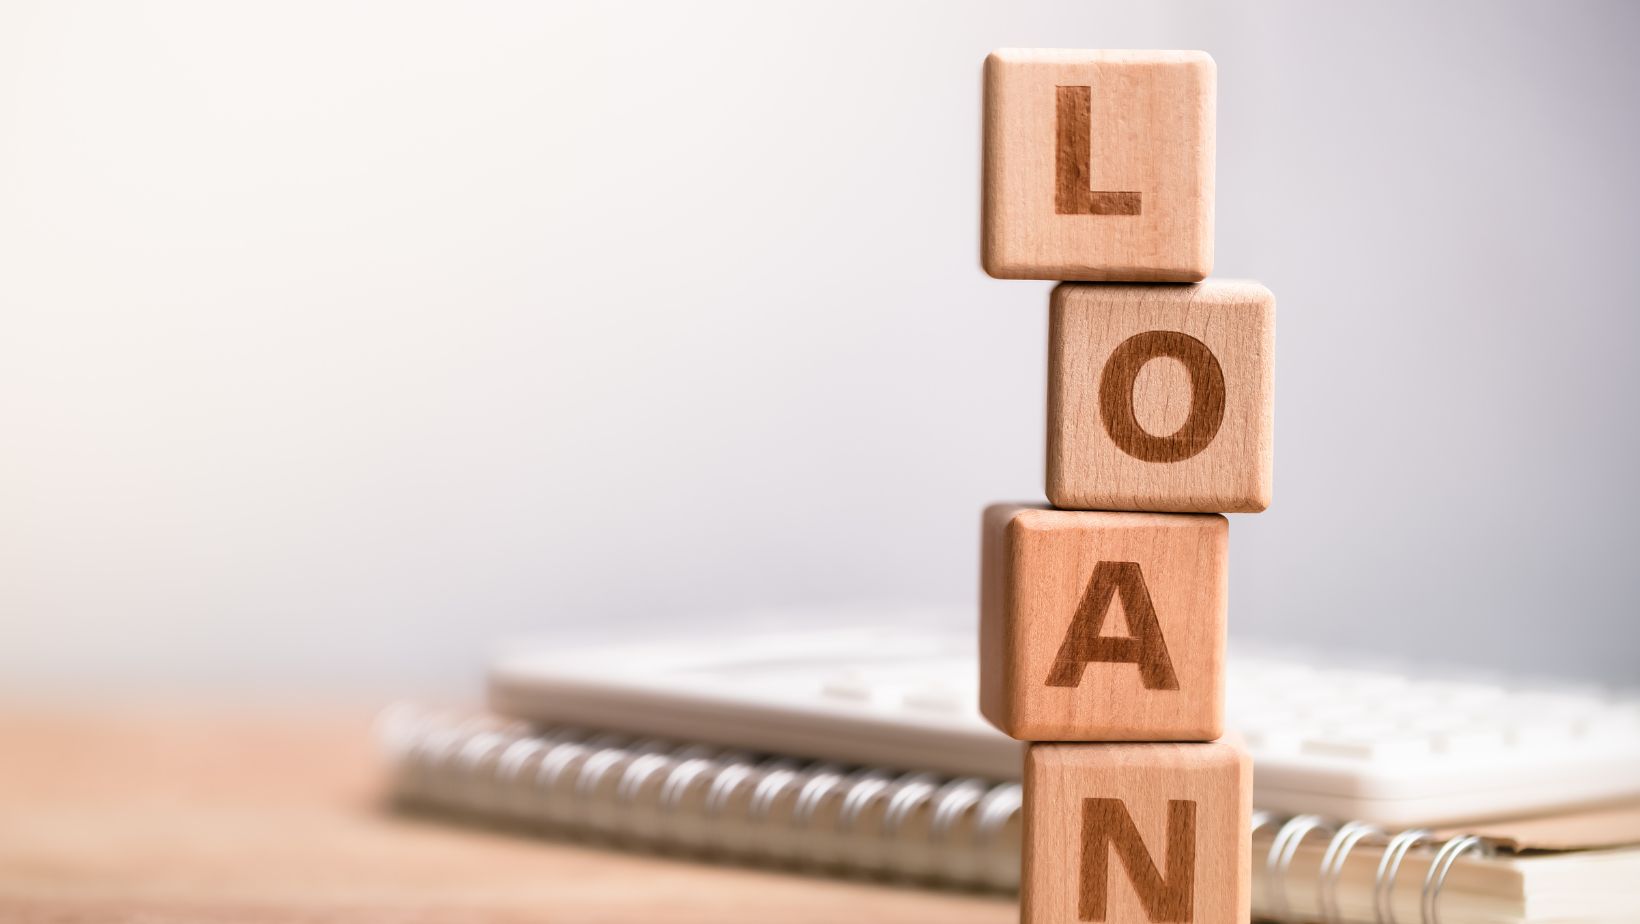 who do you contact if you've already accepted more loan money than you need?